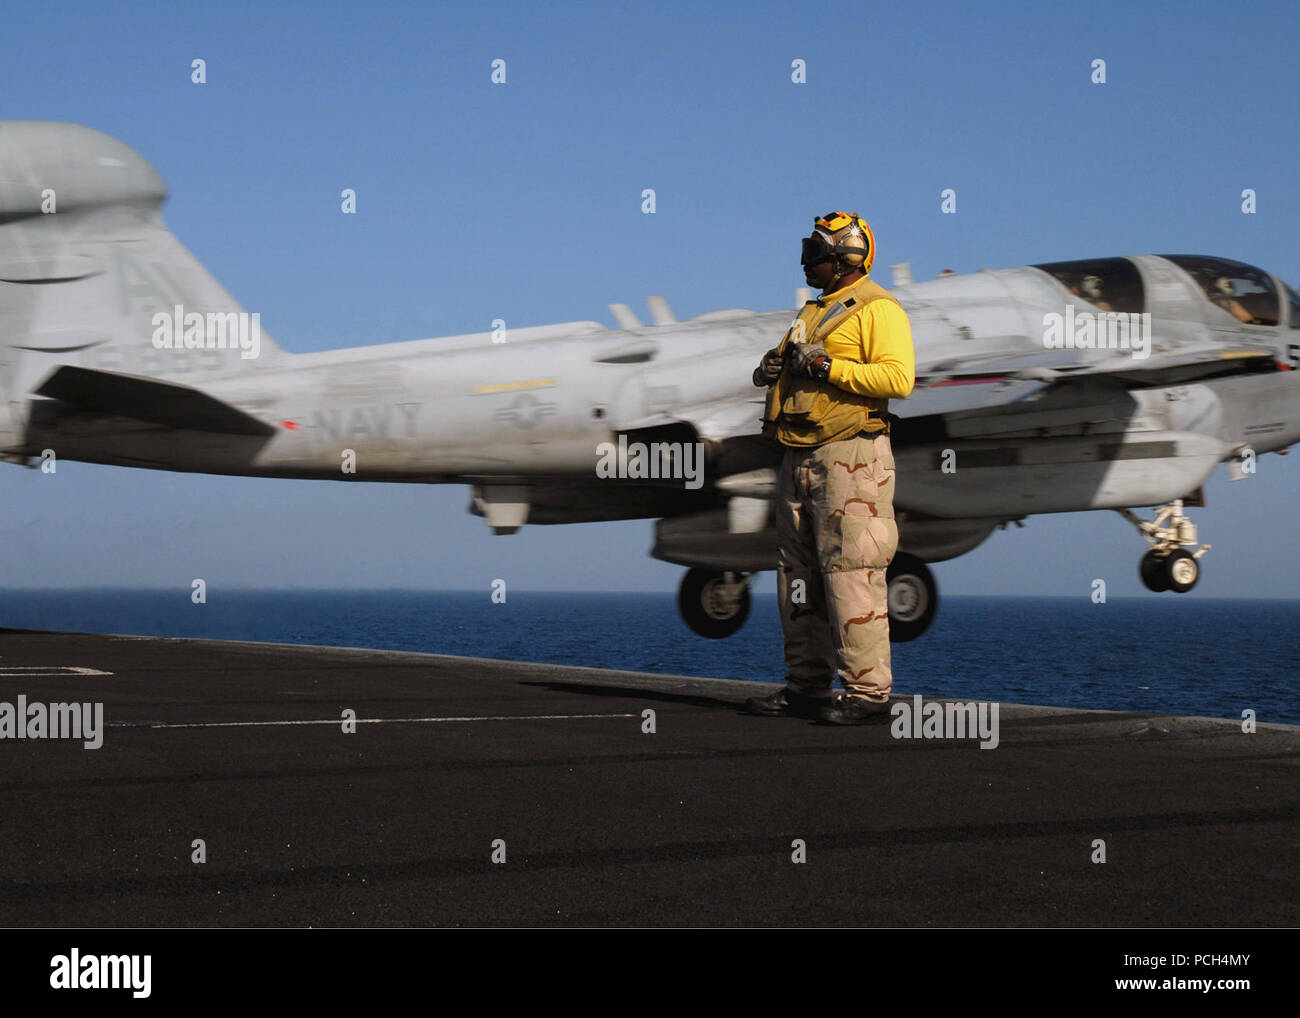 Chief Petty Officer aviation boatswain's mate (handling) Richard McCray stands by as an EA-6B Prowler assigned to the 'Shadowhawks' of Electronic Attack Squadron 141 launches from the aircraft carrier USS Theodore Roosevelt. The Nimitz-Class aircraft carrier and embarked Carrier Air Wing 8 are underway conducting operations in the U.S. 5th Fleet area of responsibility. Stock Photo